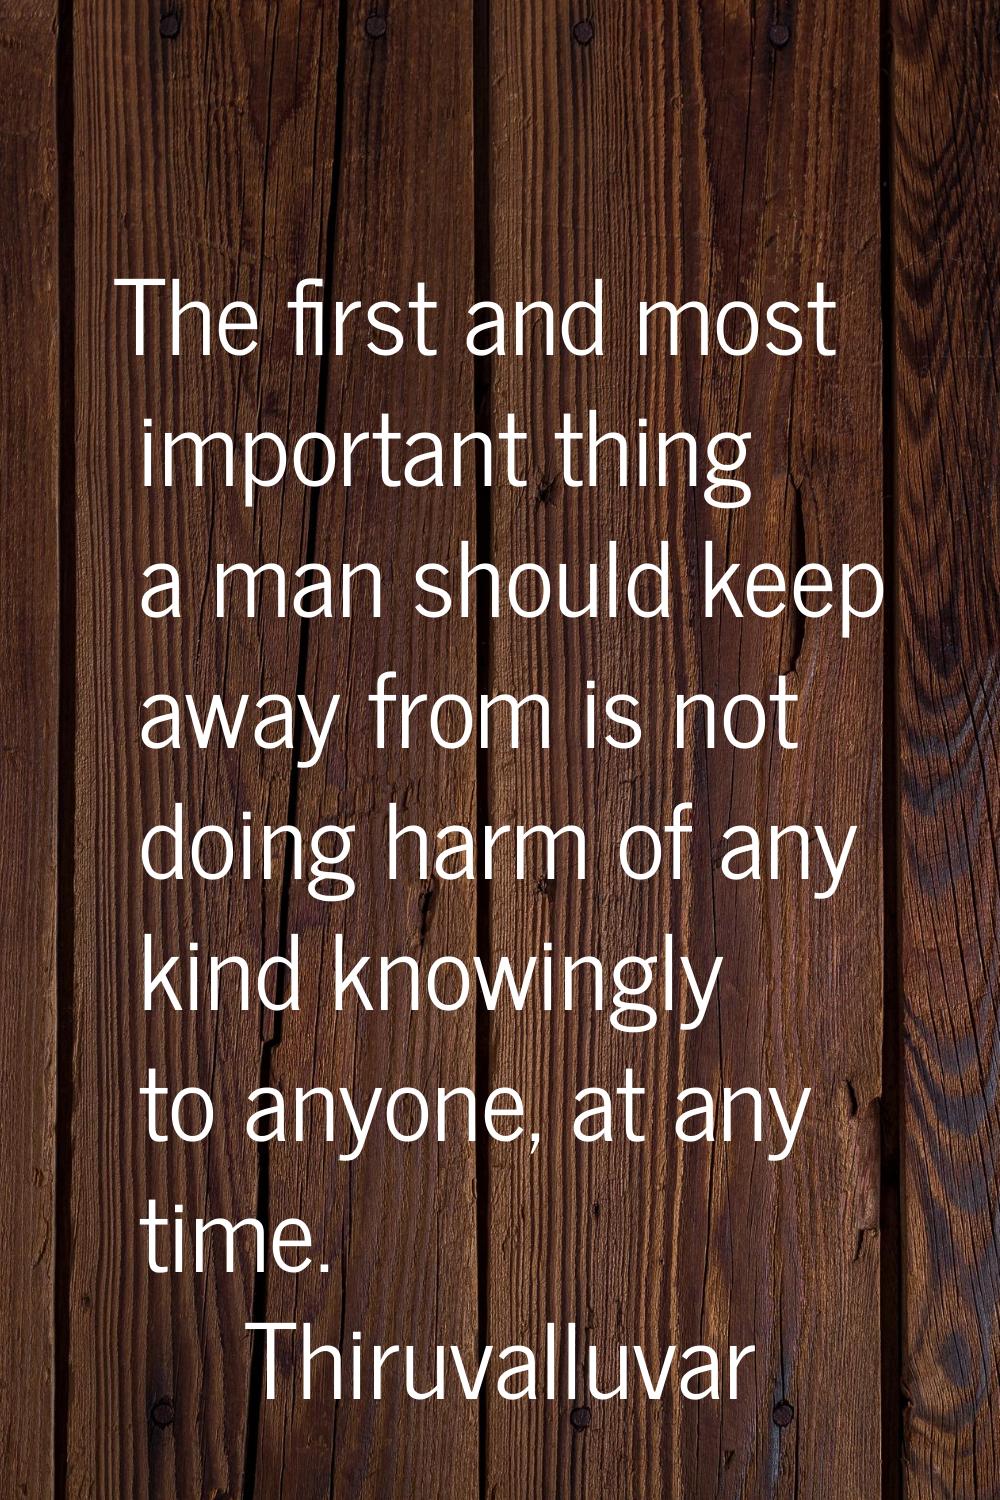 The first and most important thing a man should keep away from is not doing harm of any kind knowin